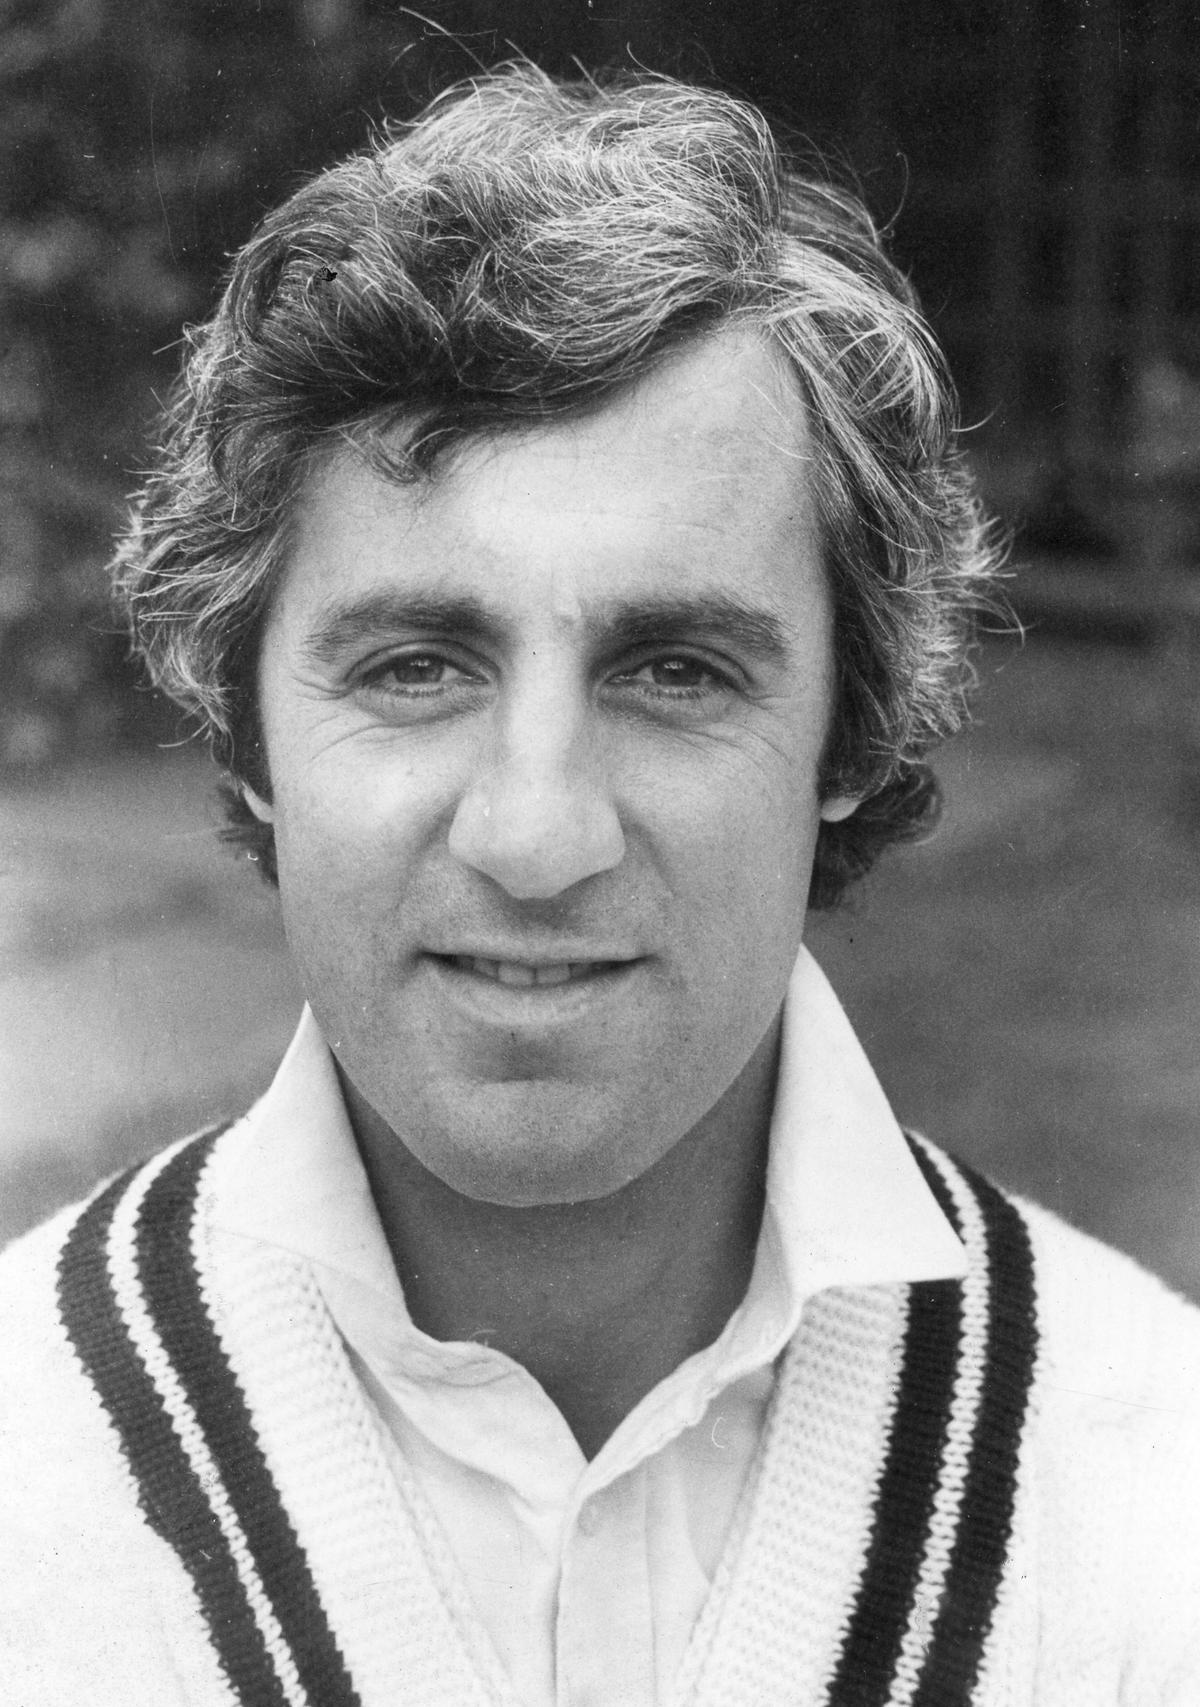 Picture of Mike Brearley taken in 1978.